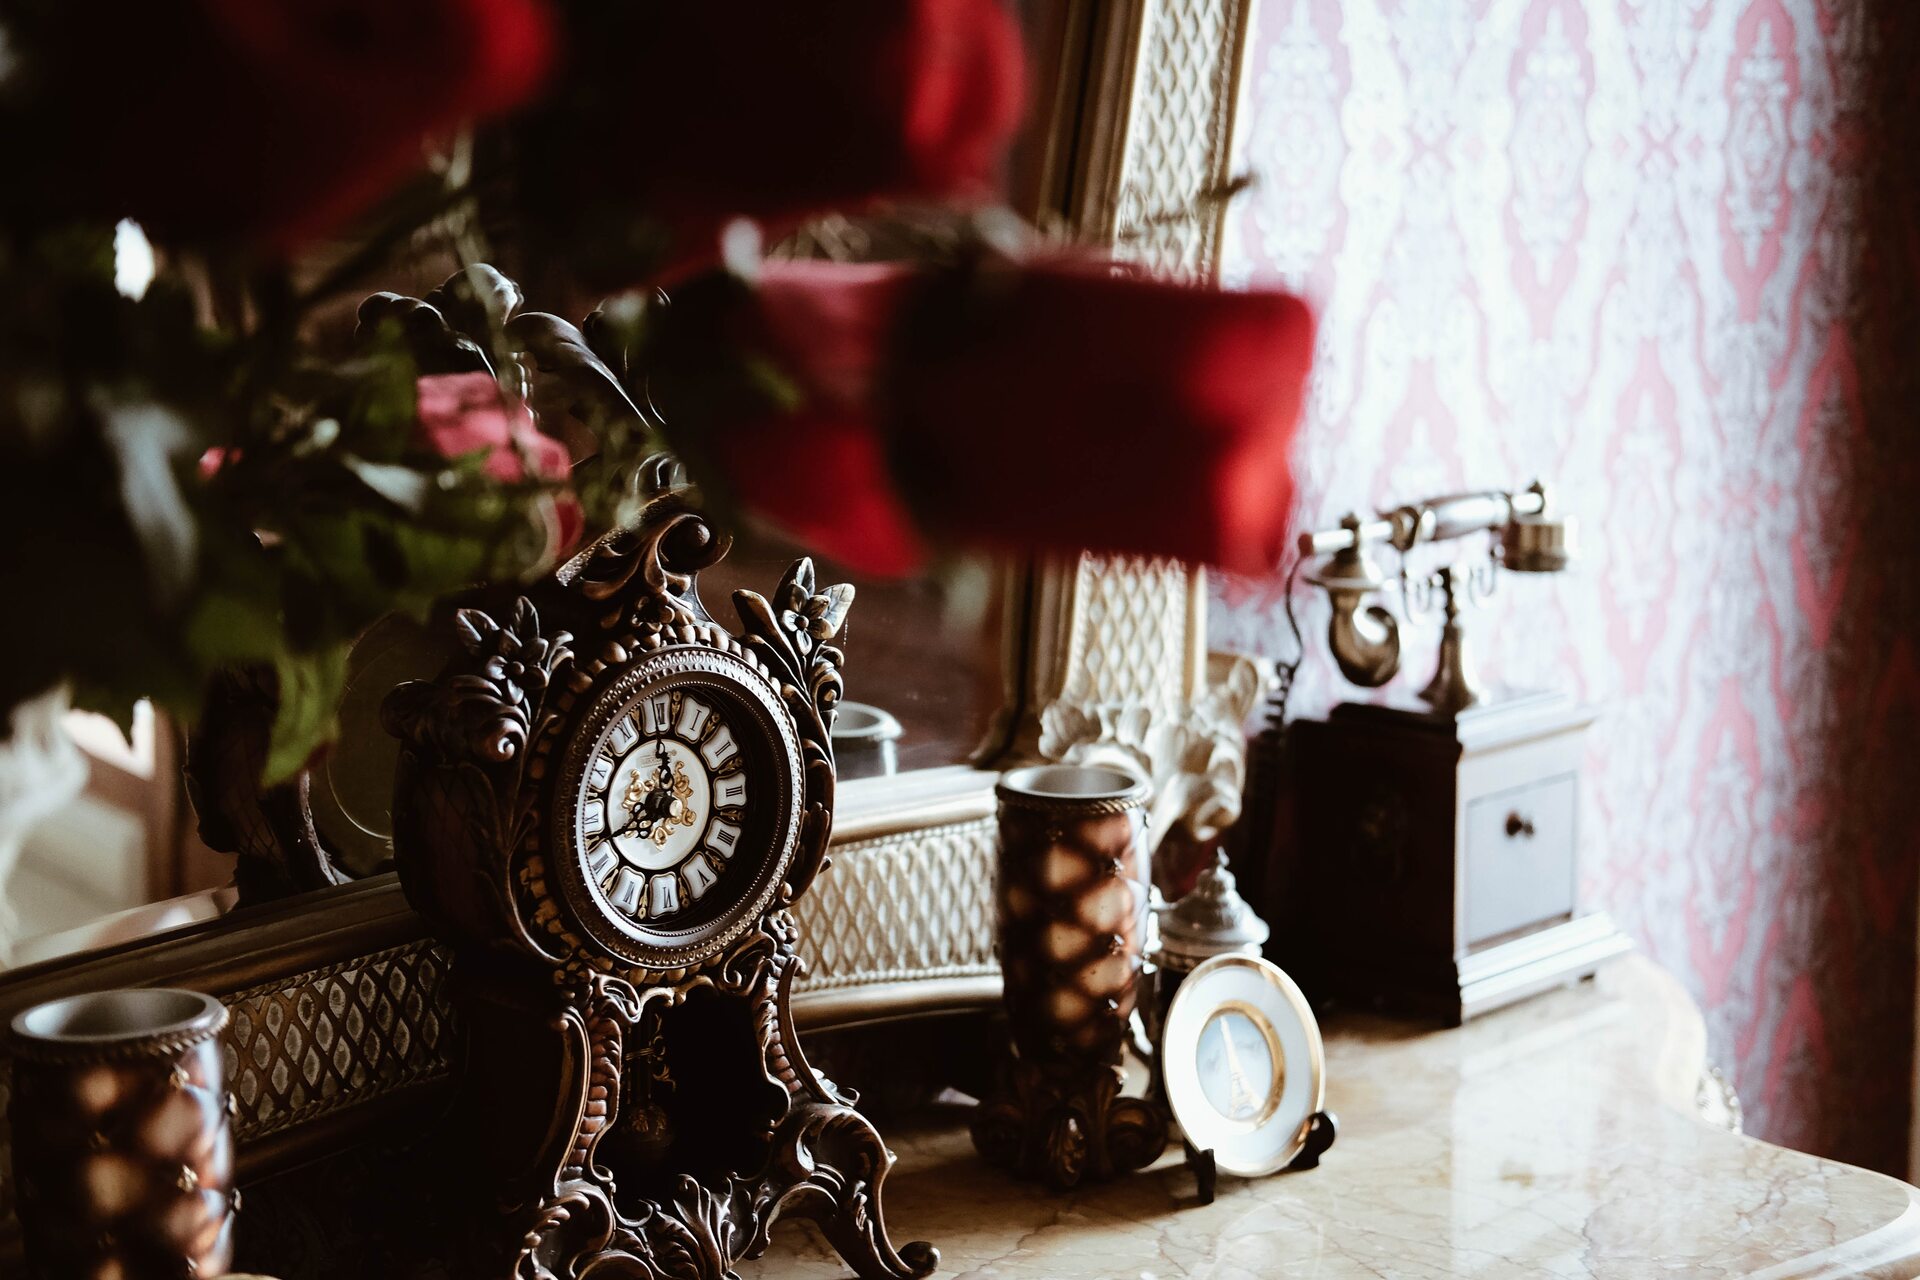 Old clock and telephone in front of a mirror